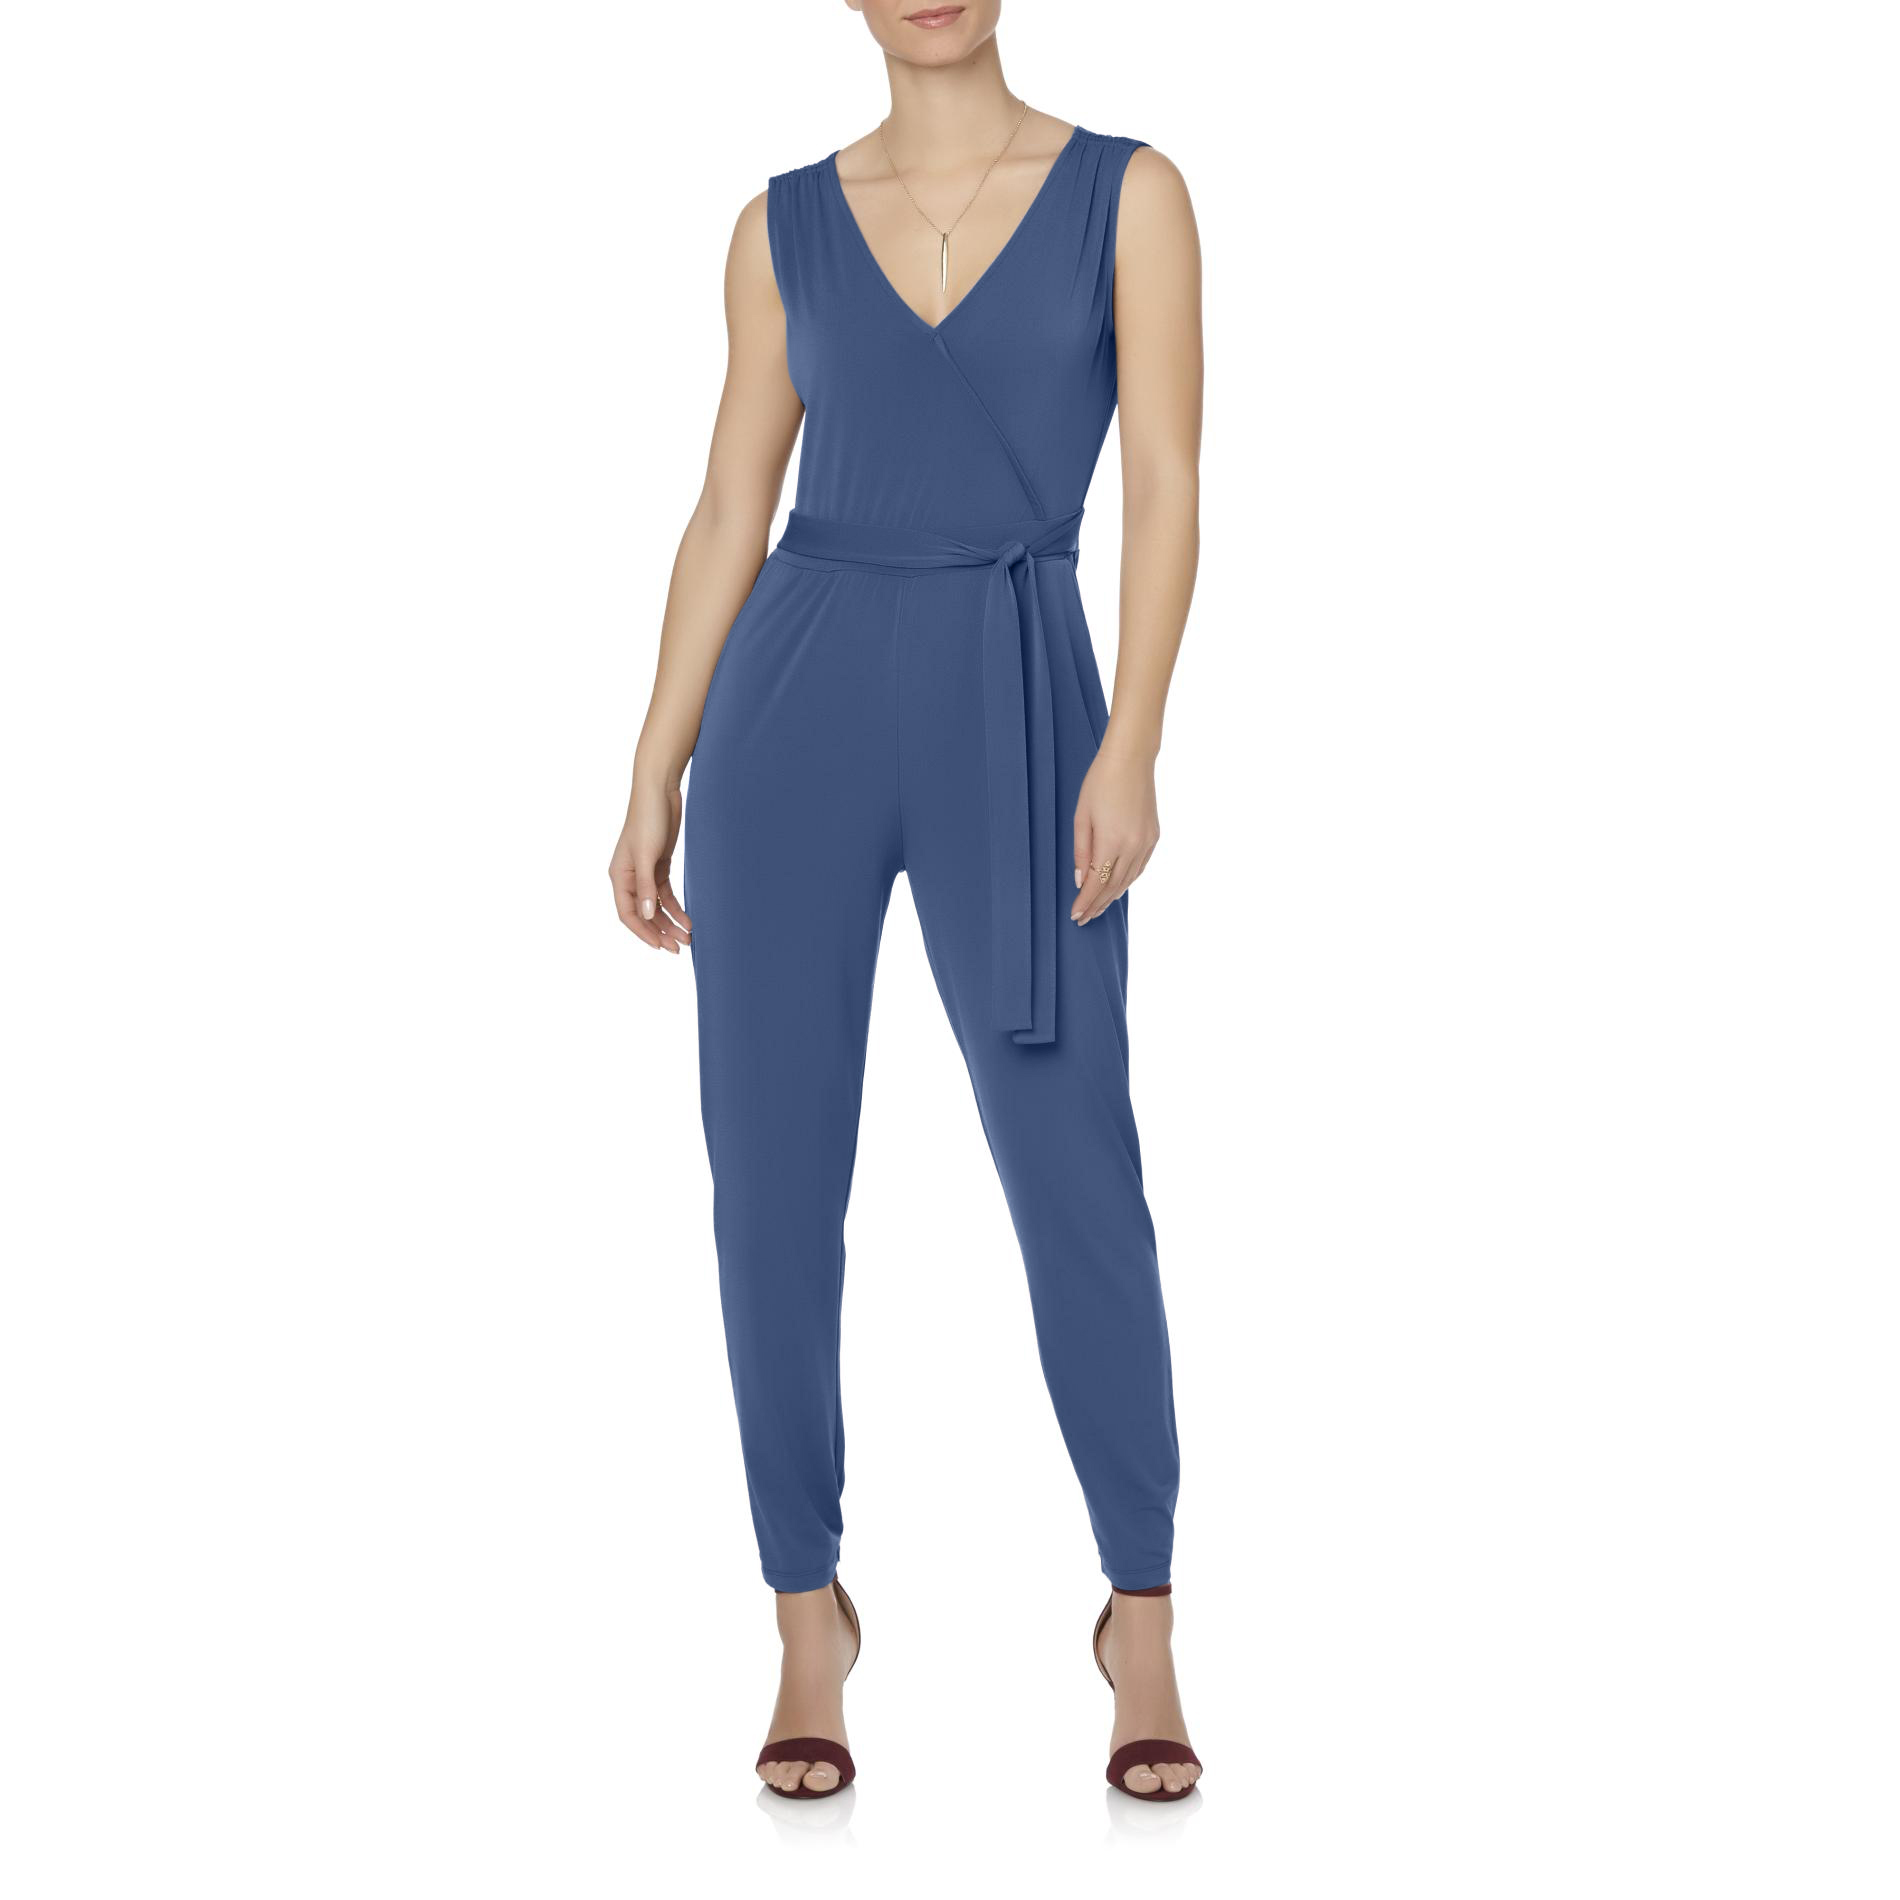 Simply Styled Women's Cross Front Jumpsuit - Striped